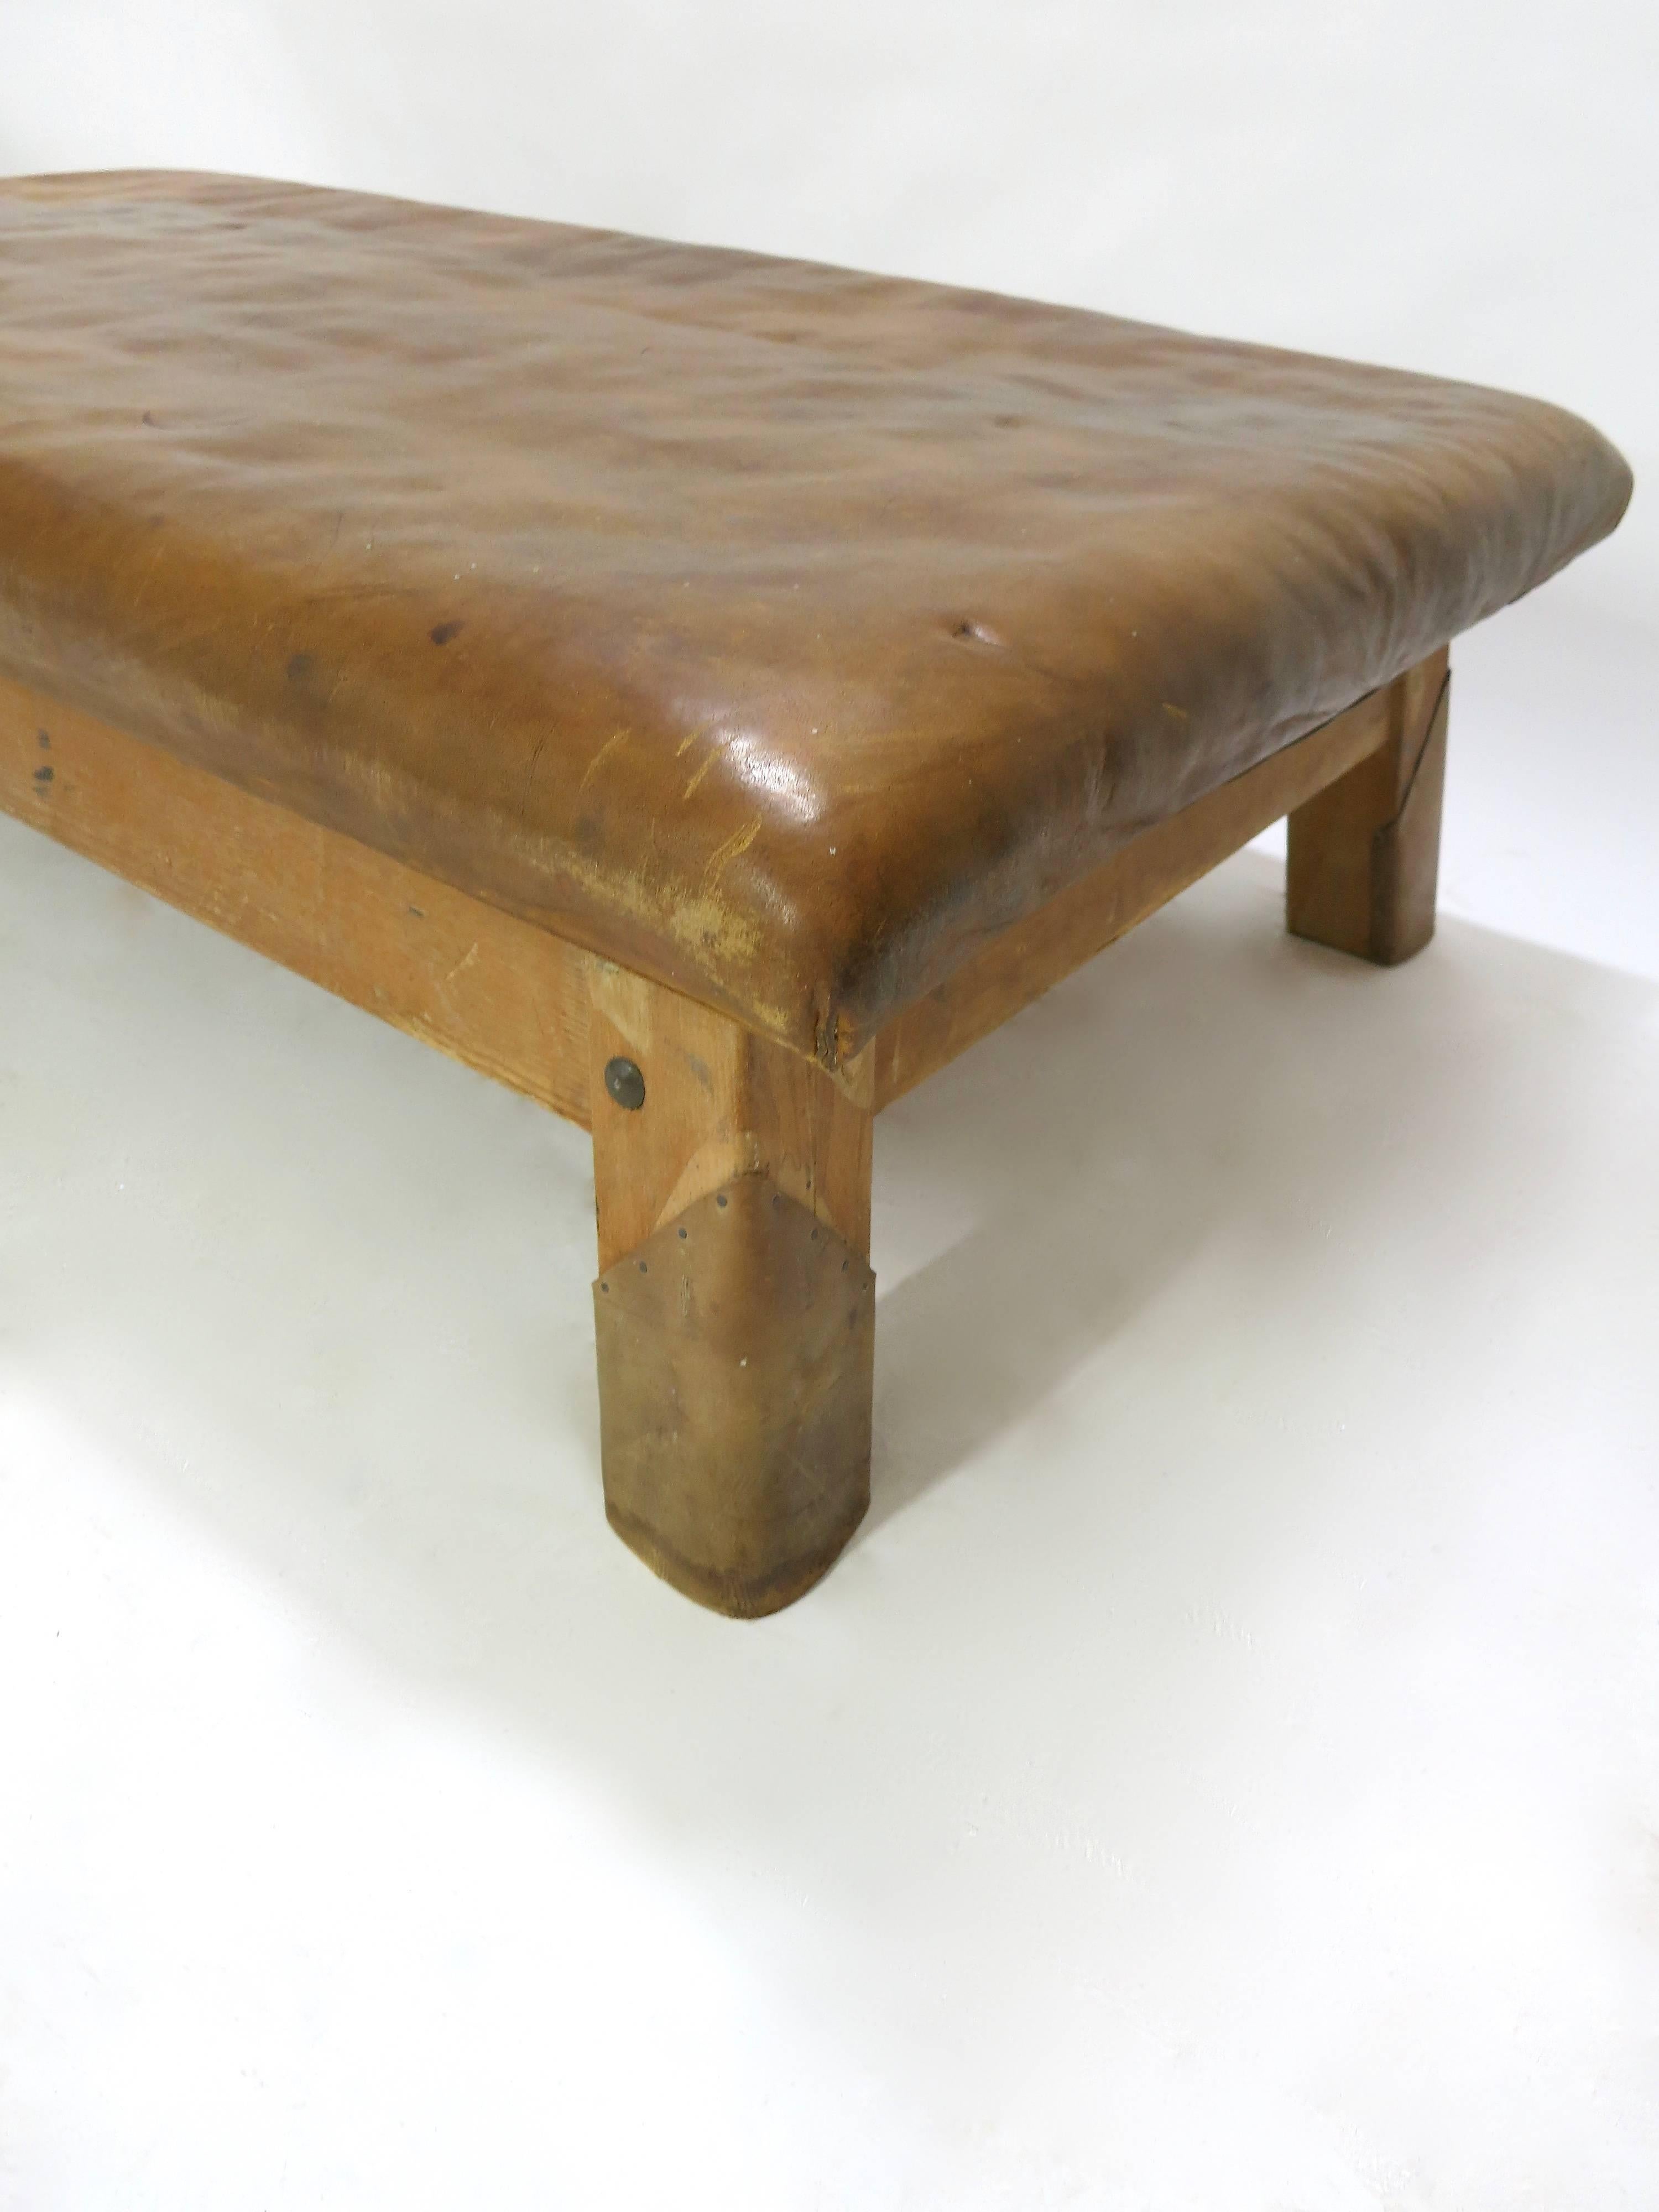 20th Century Vintage Leather Gym Bench or Table, circa 1940